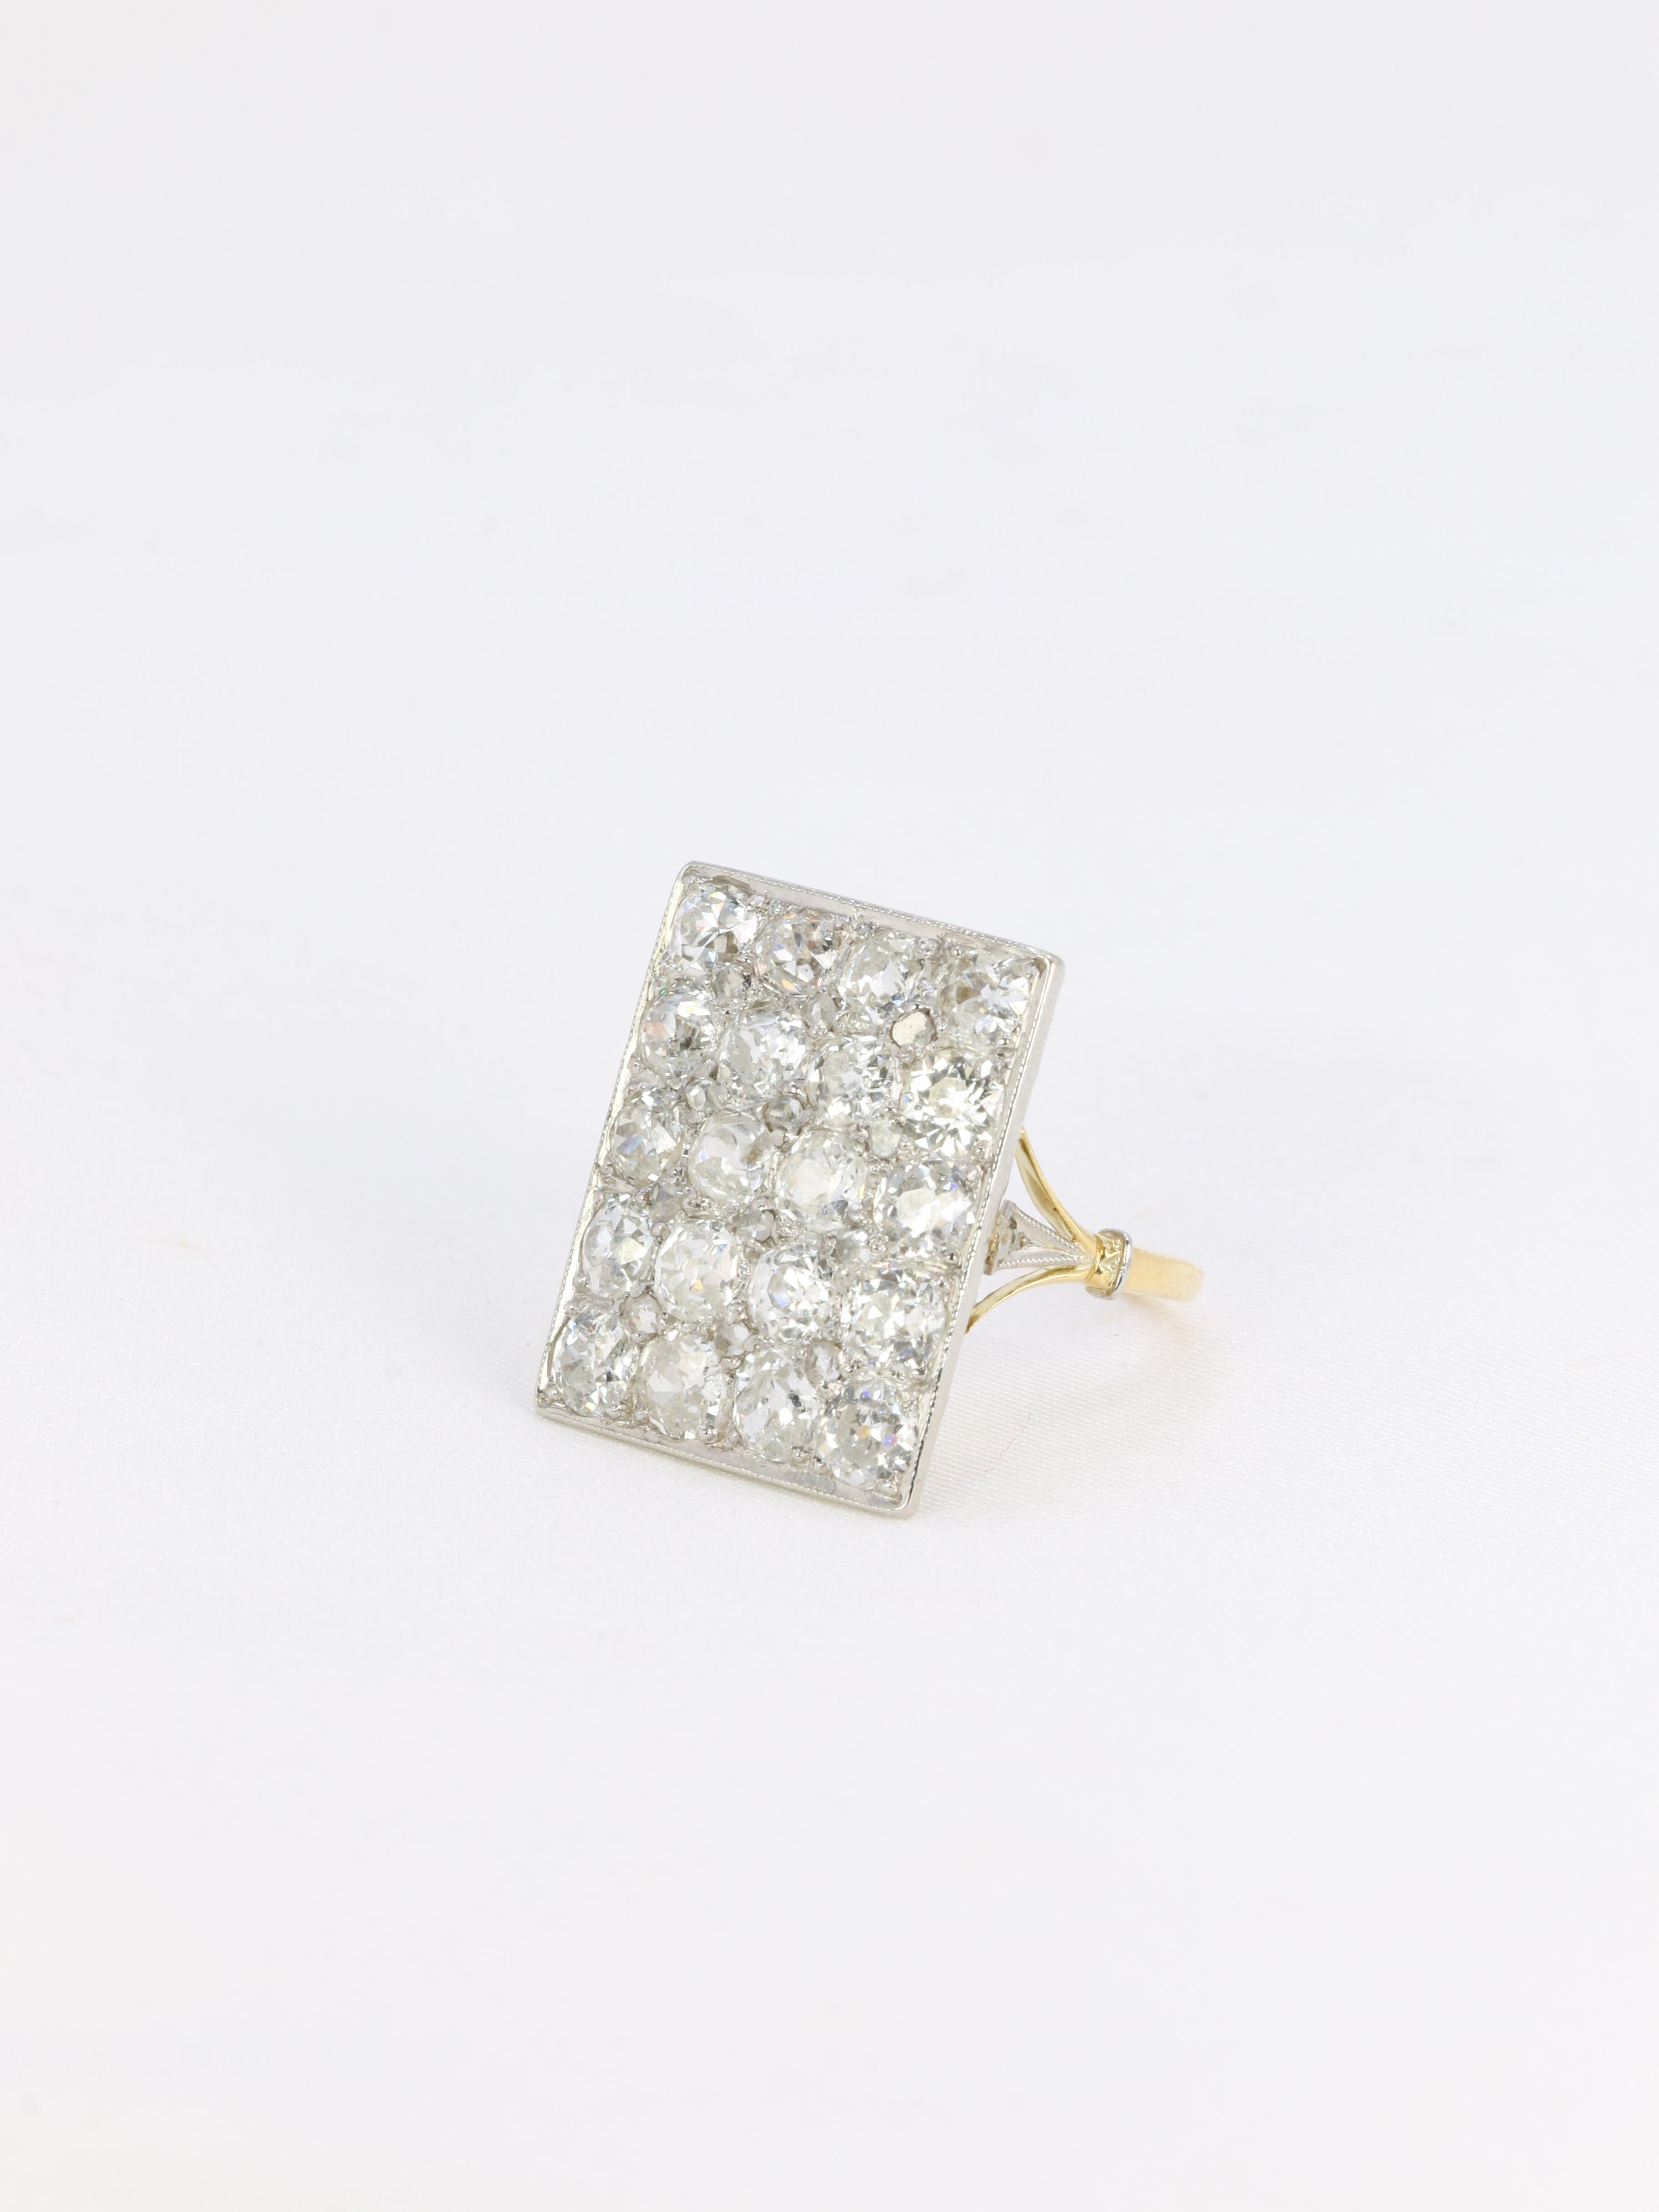 Art Deco ring in gold set with old mine cut diamonds 1